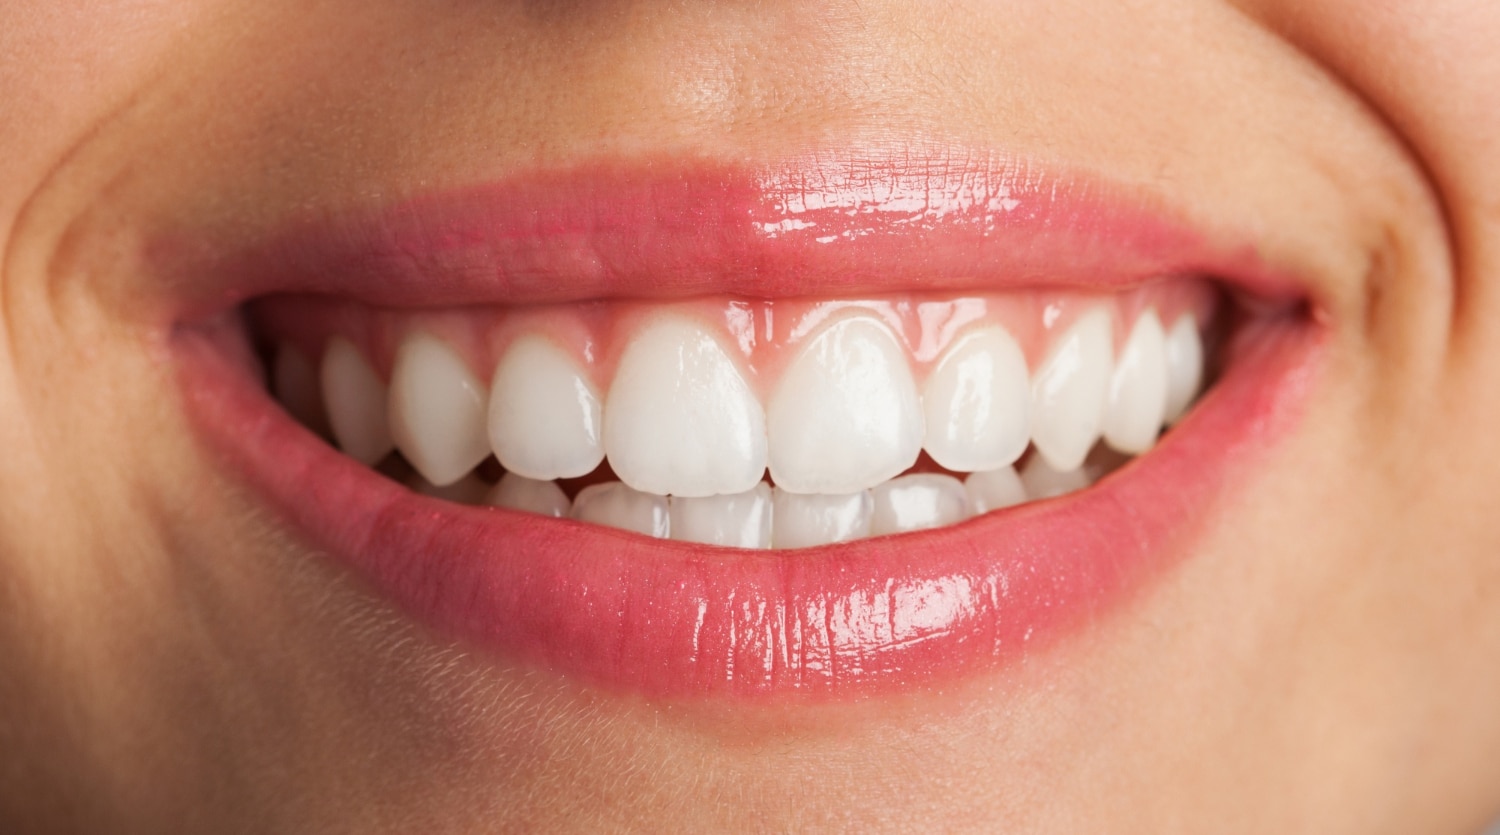 Teeth Whitening in New Jersey: How to Get the Treatment